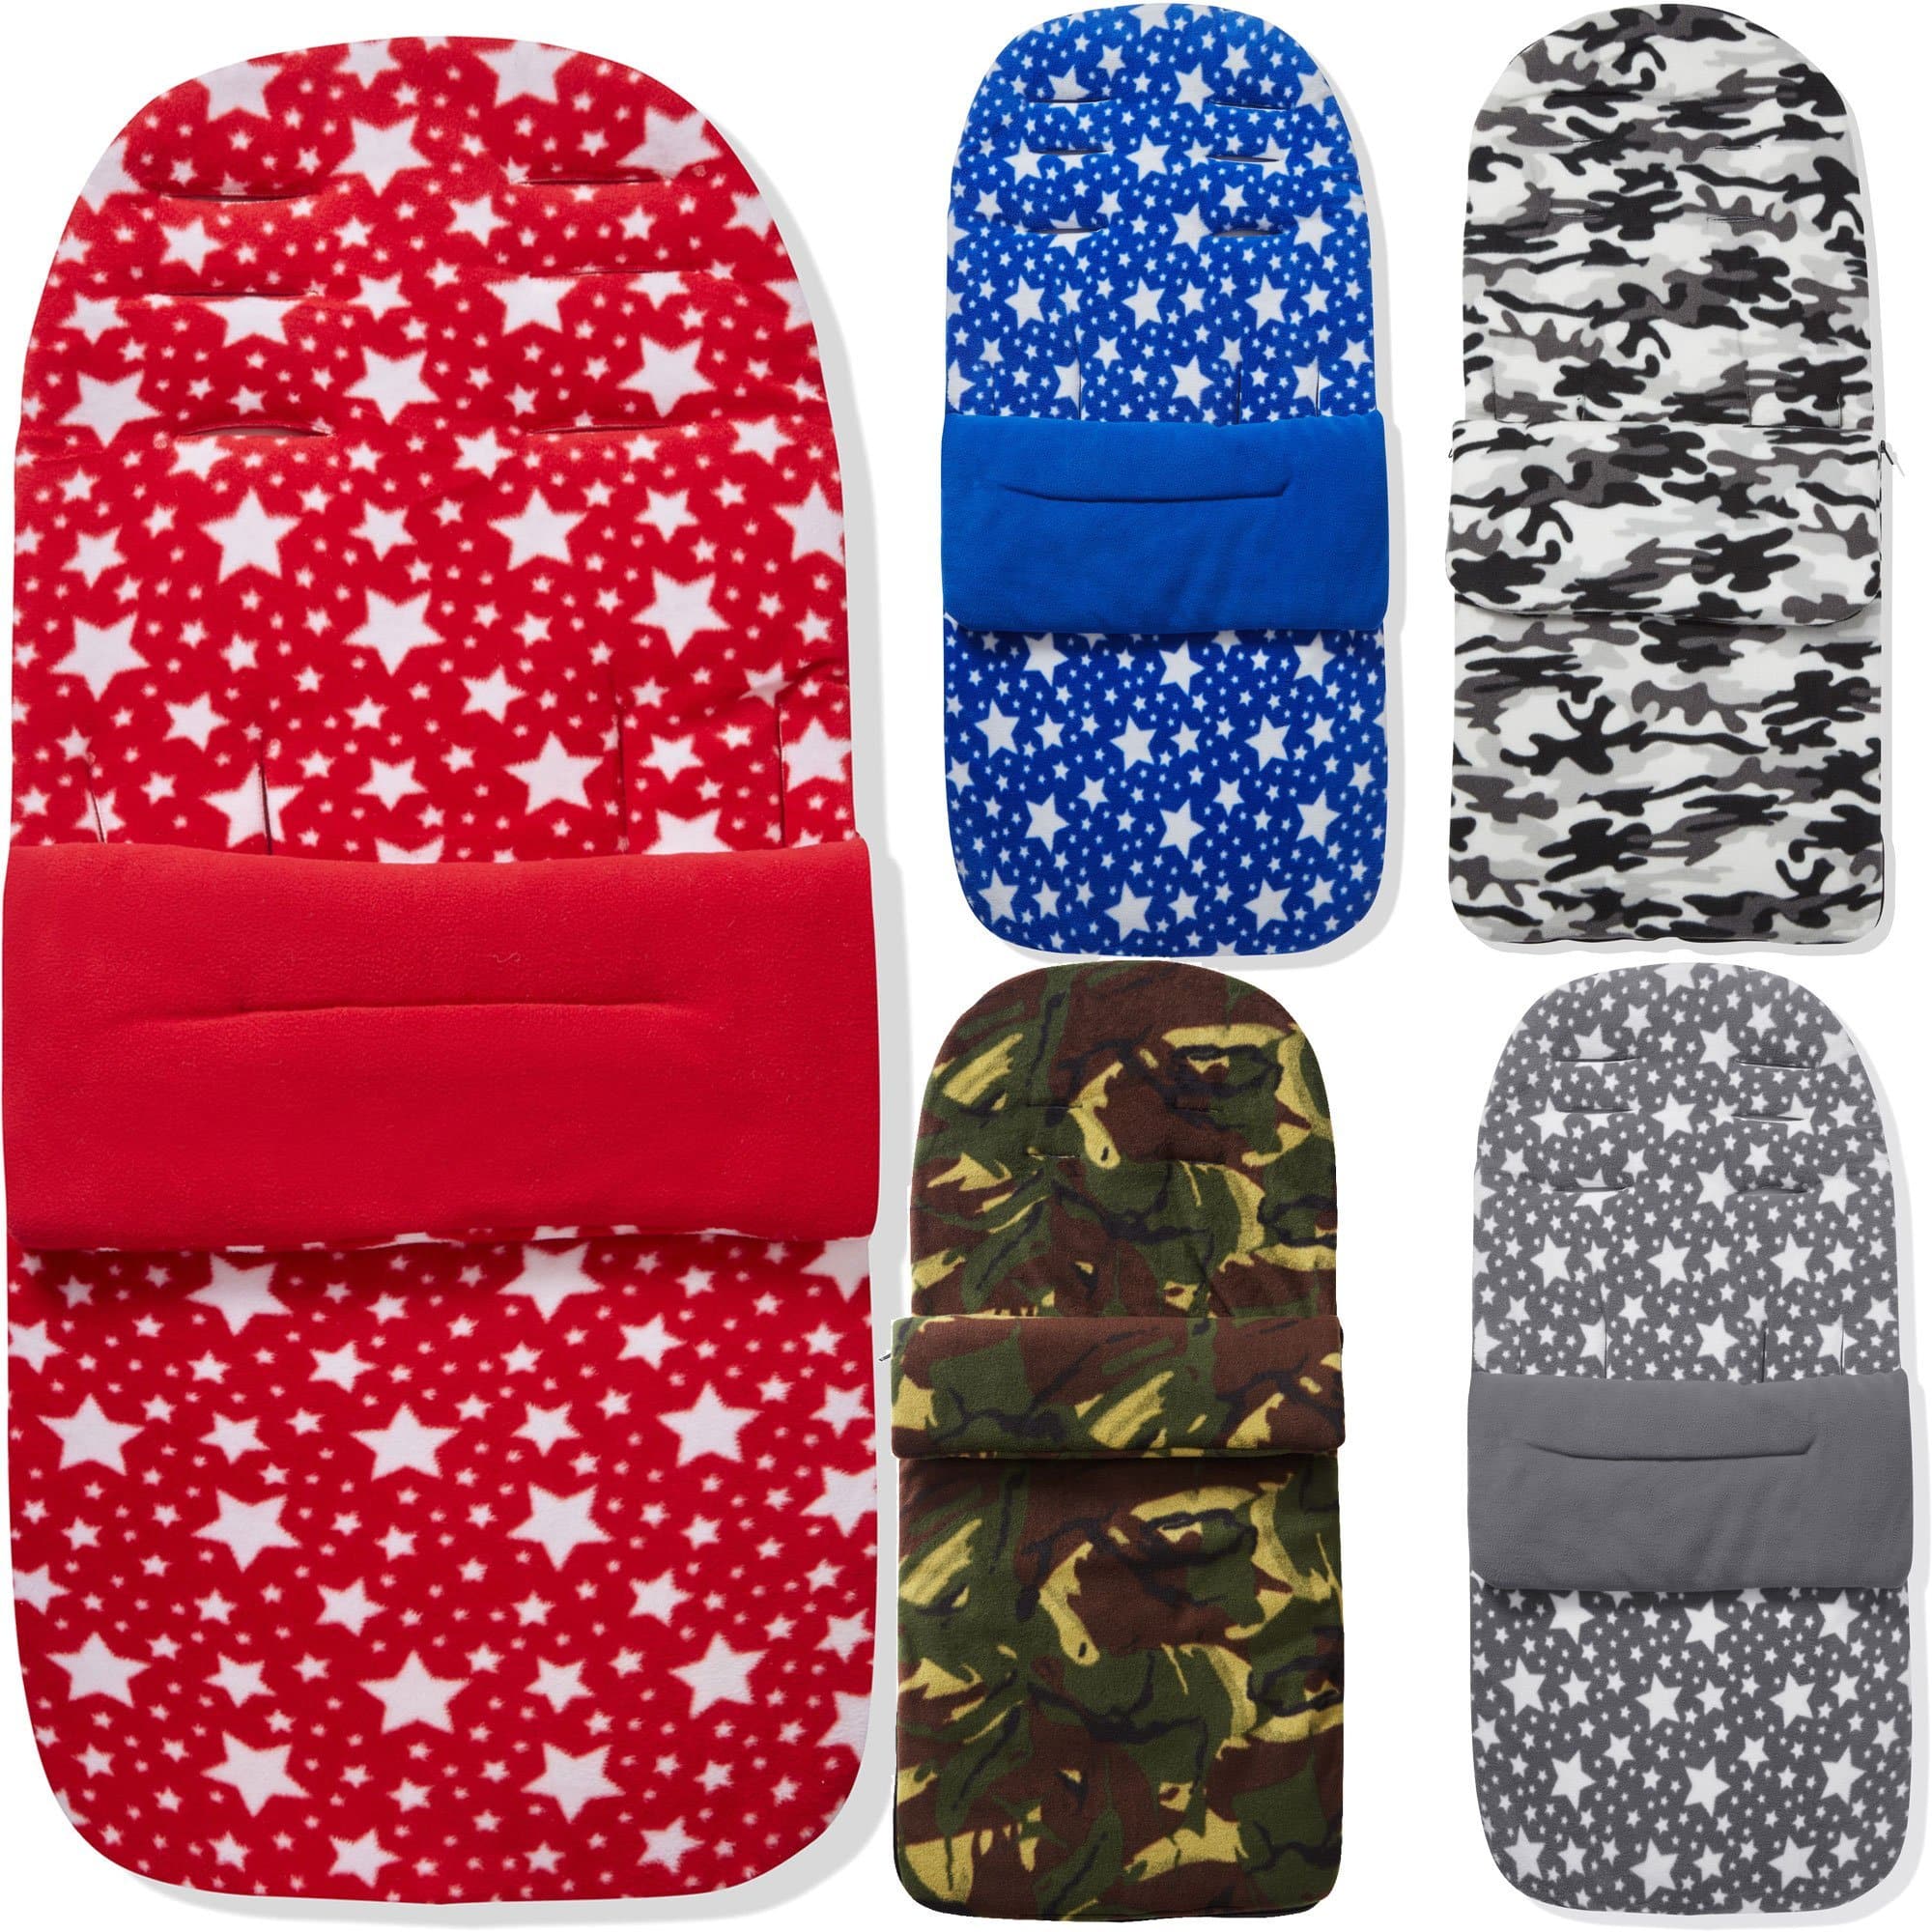 Fleece Footmuff / Cosy Toes Compatible with Joolz - For Your Little One